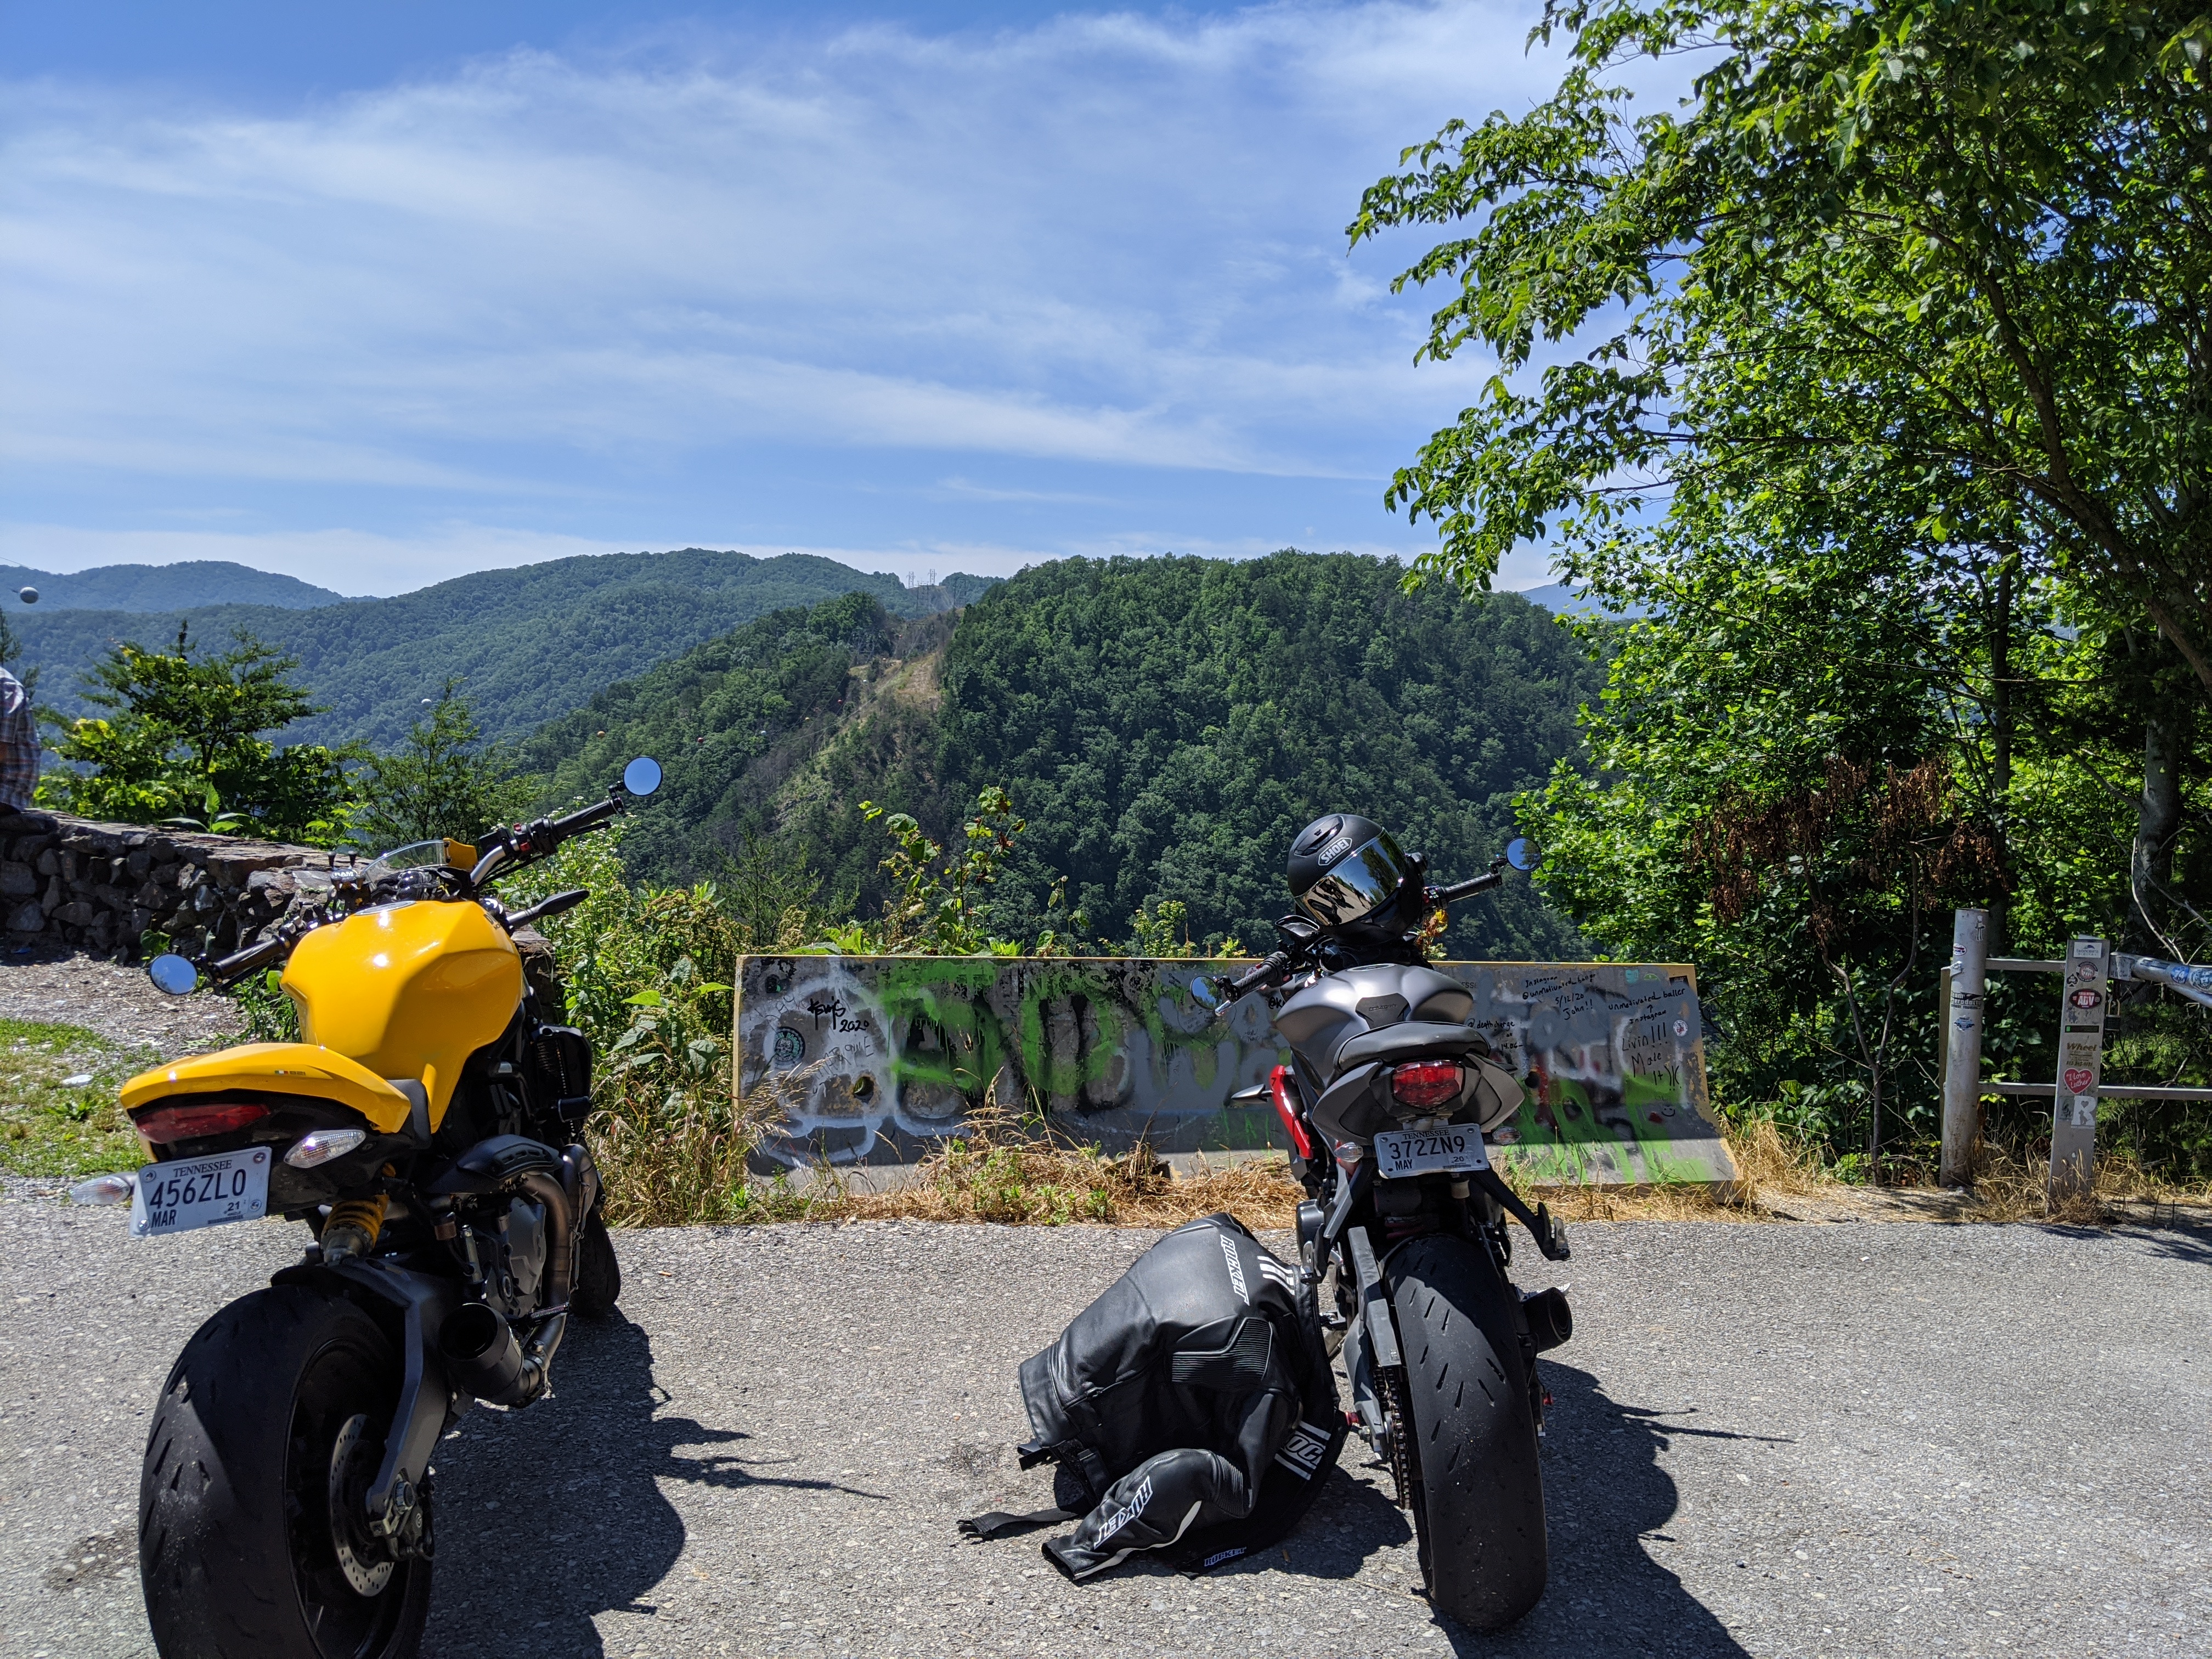 Bikes at the end of the Dragon